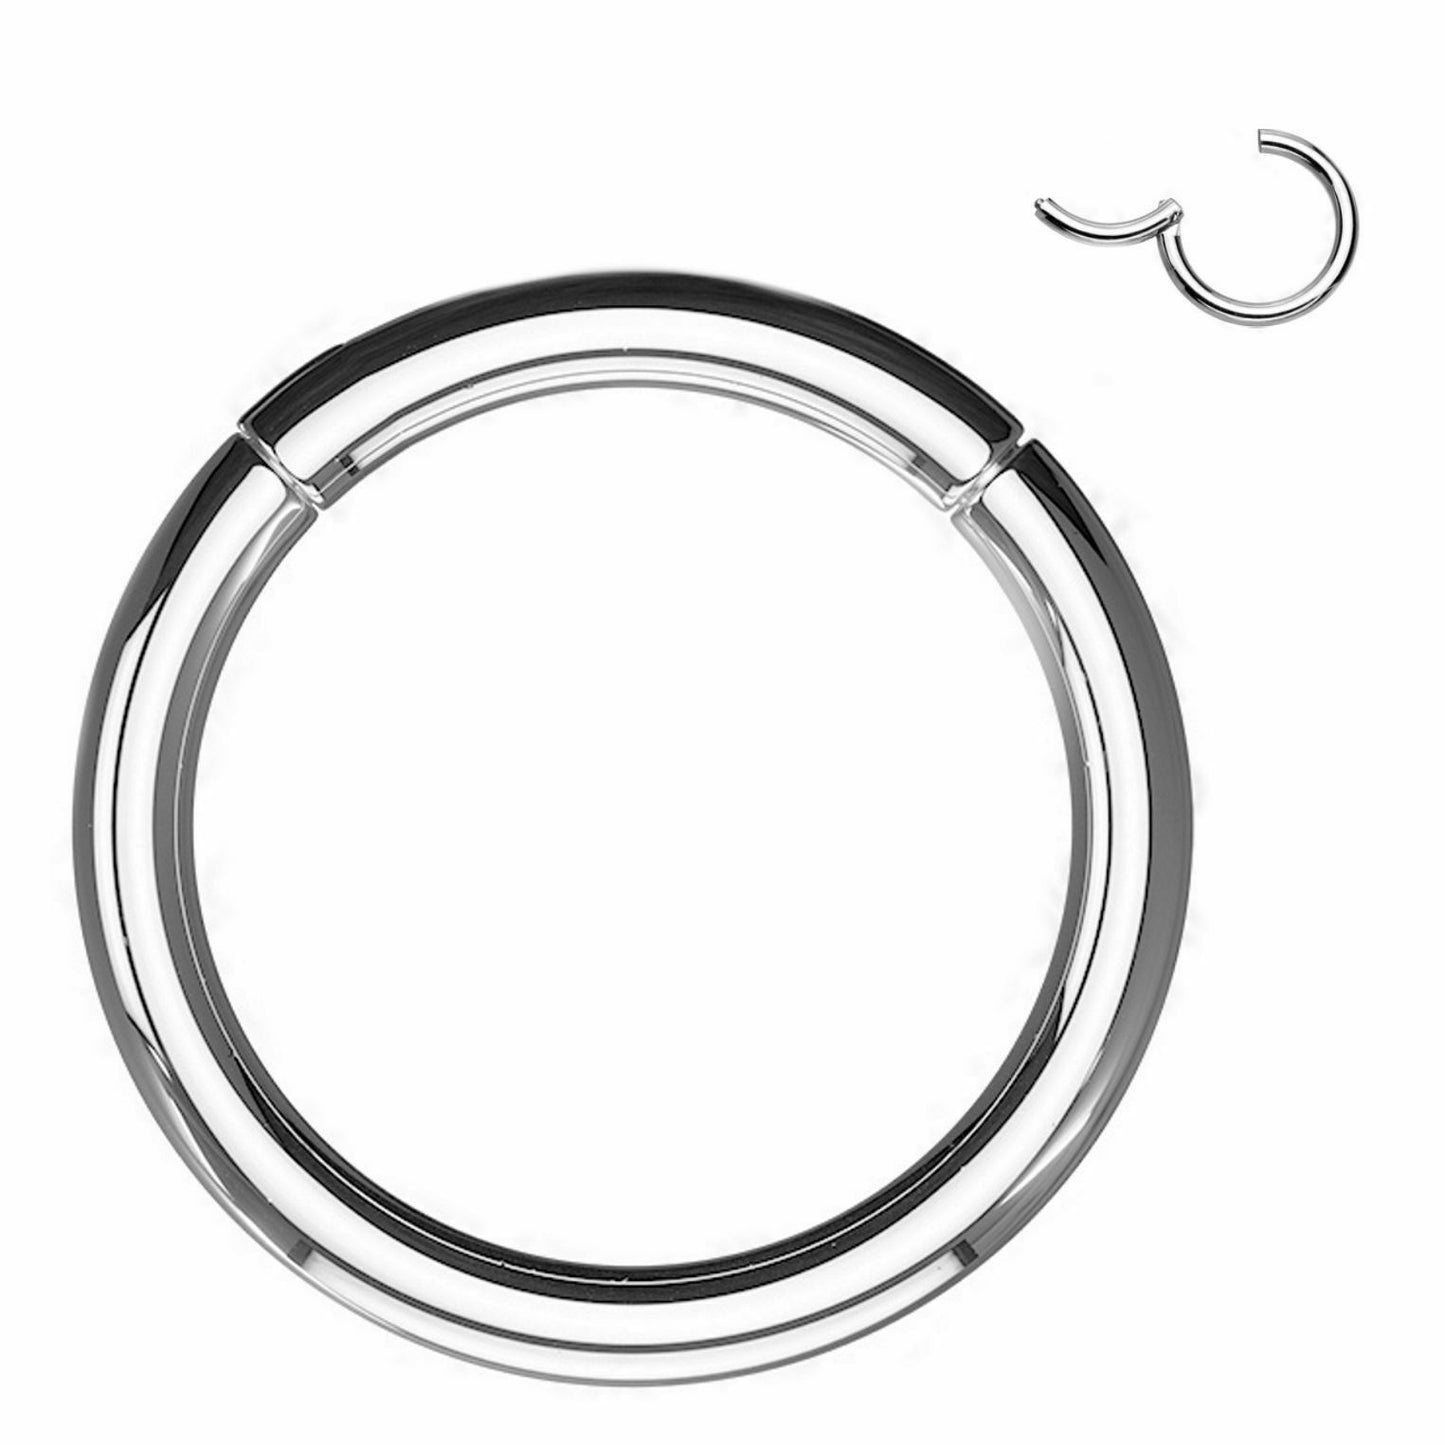 Hinged Segment Rings Made of Surgical Steel All sizes and Gauges